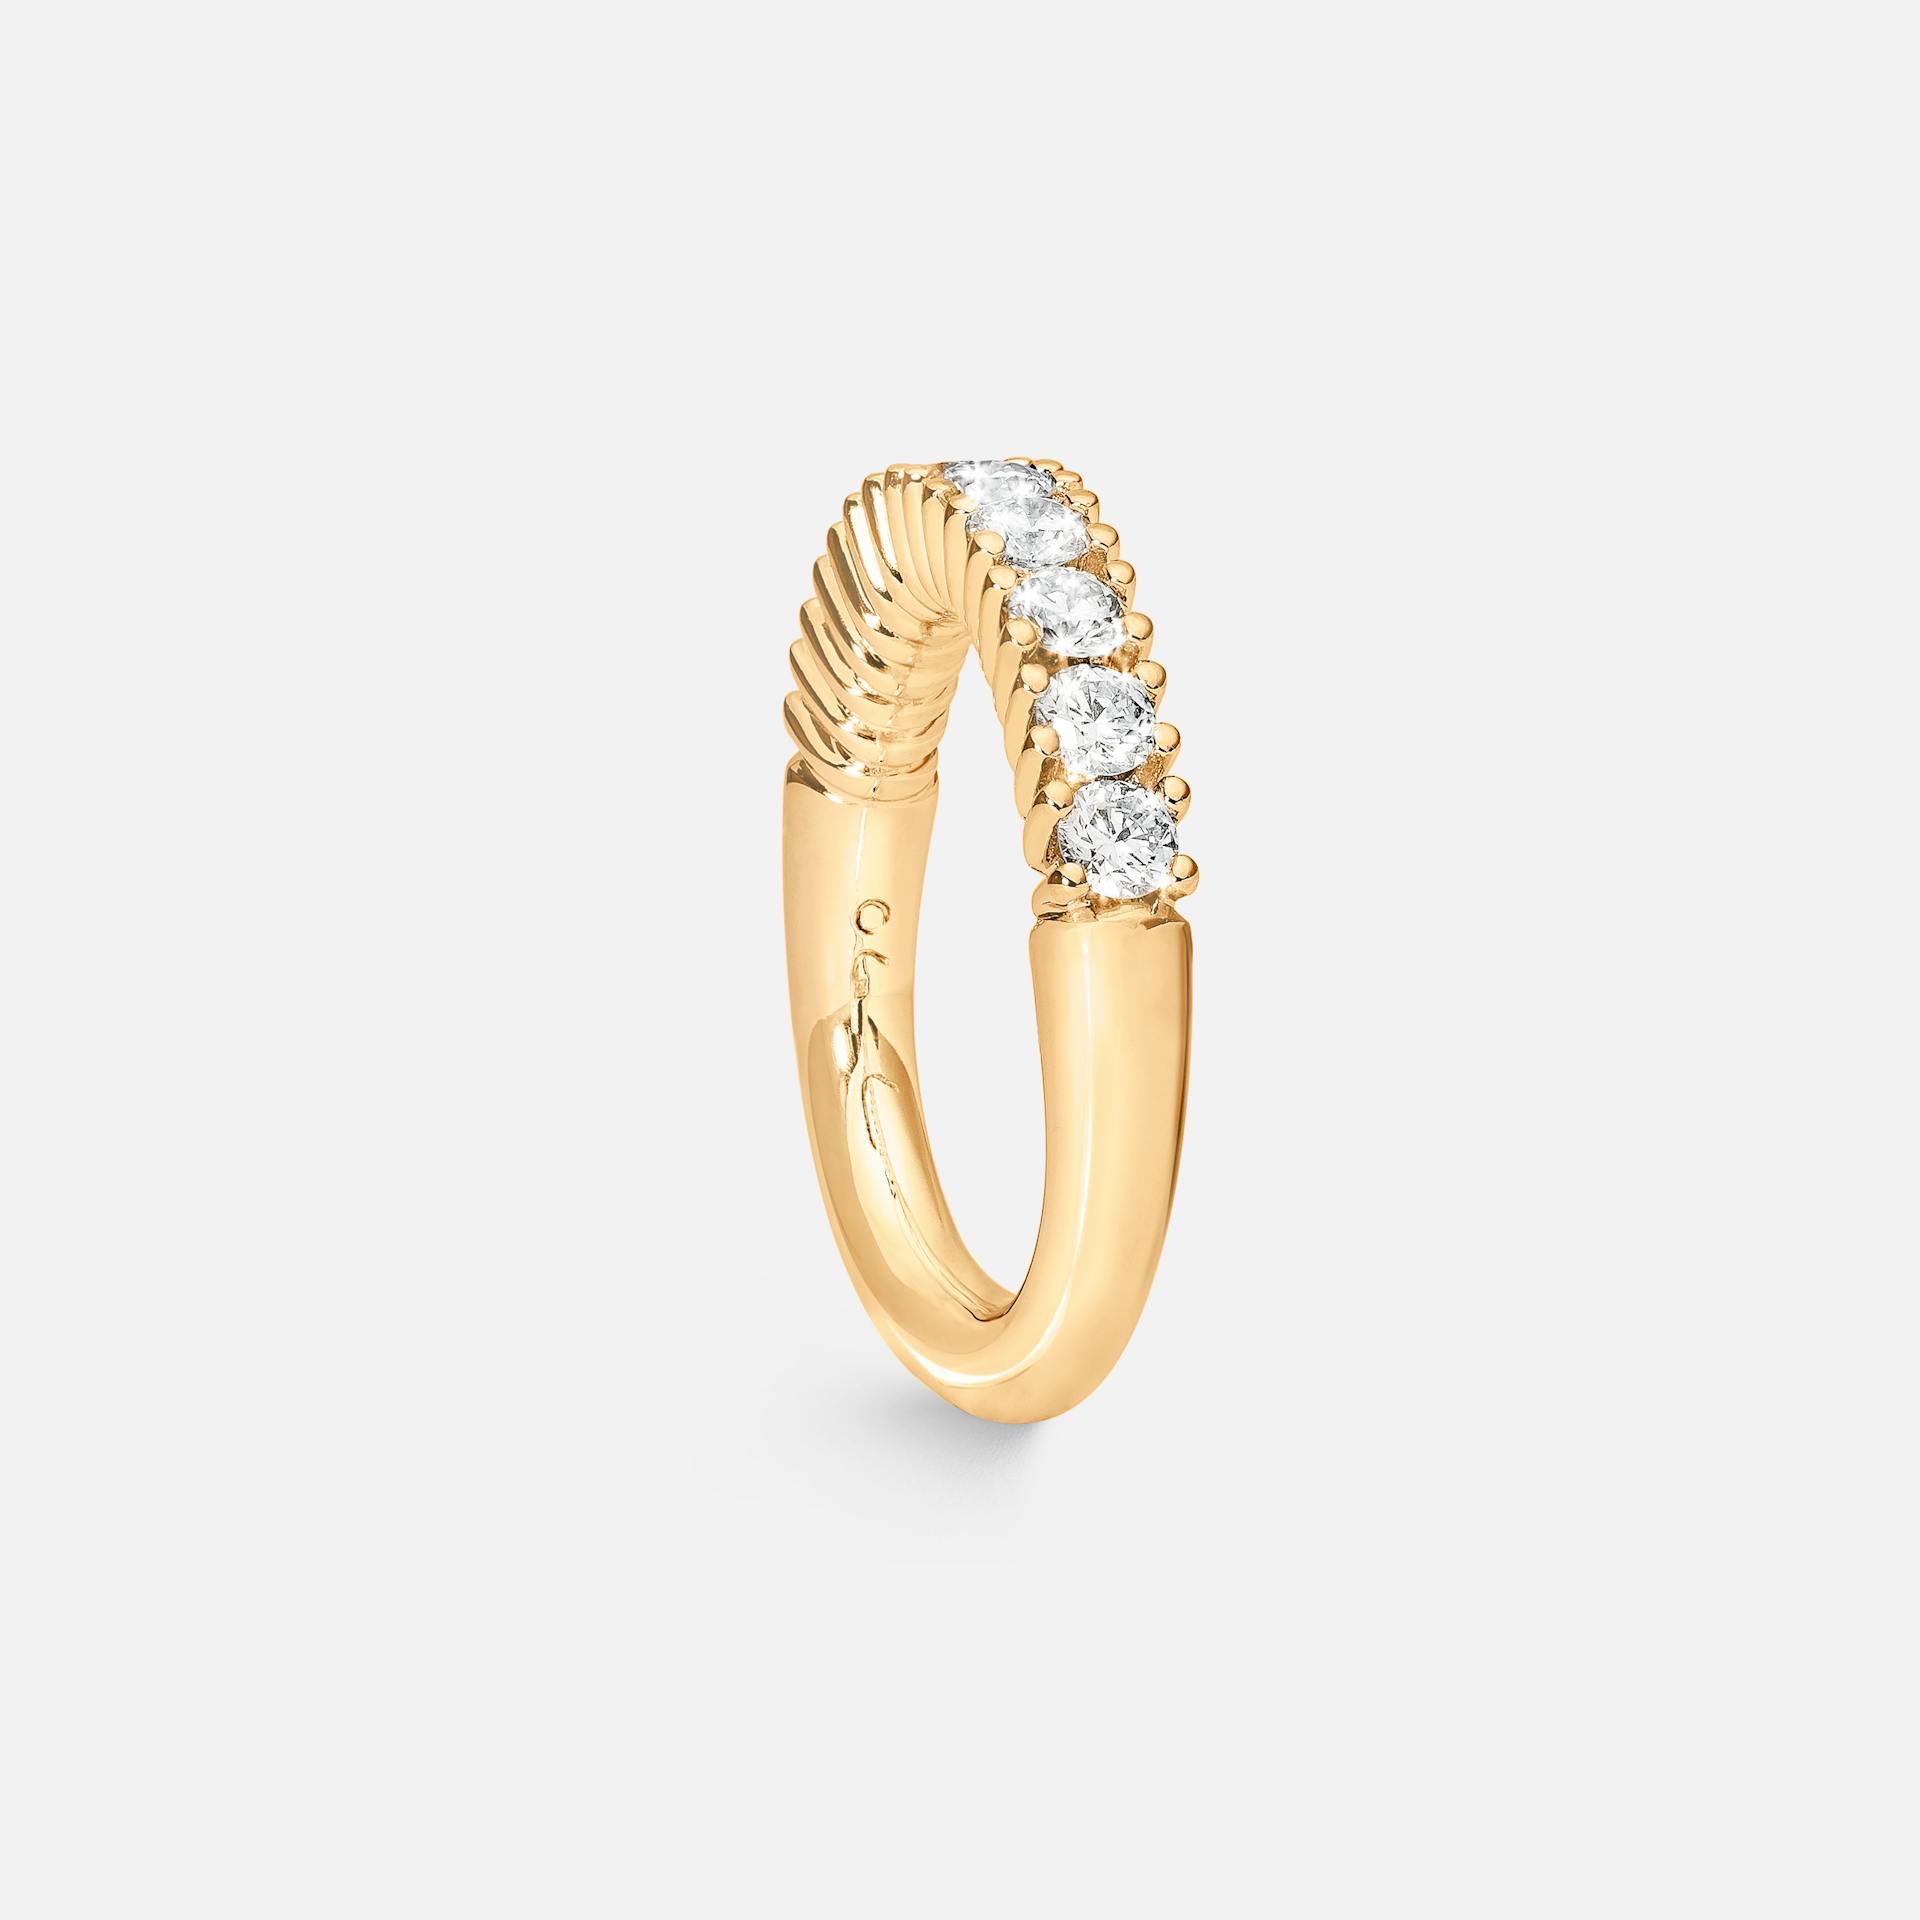 Celebration Alliance Ring in Polished Yellow Gold with Diamonds  |  Ole Lynggaard Copenhagen 